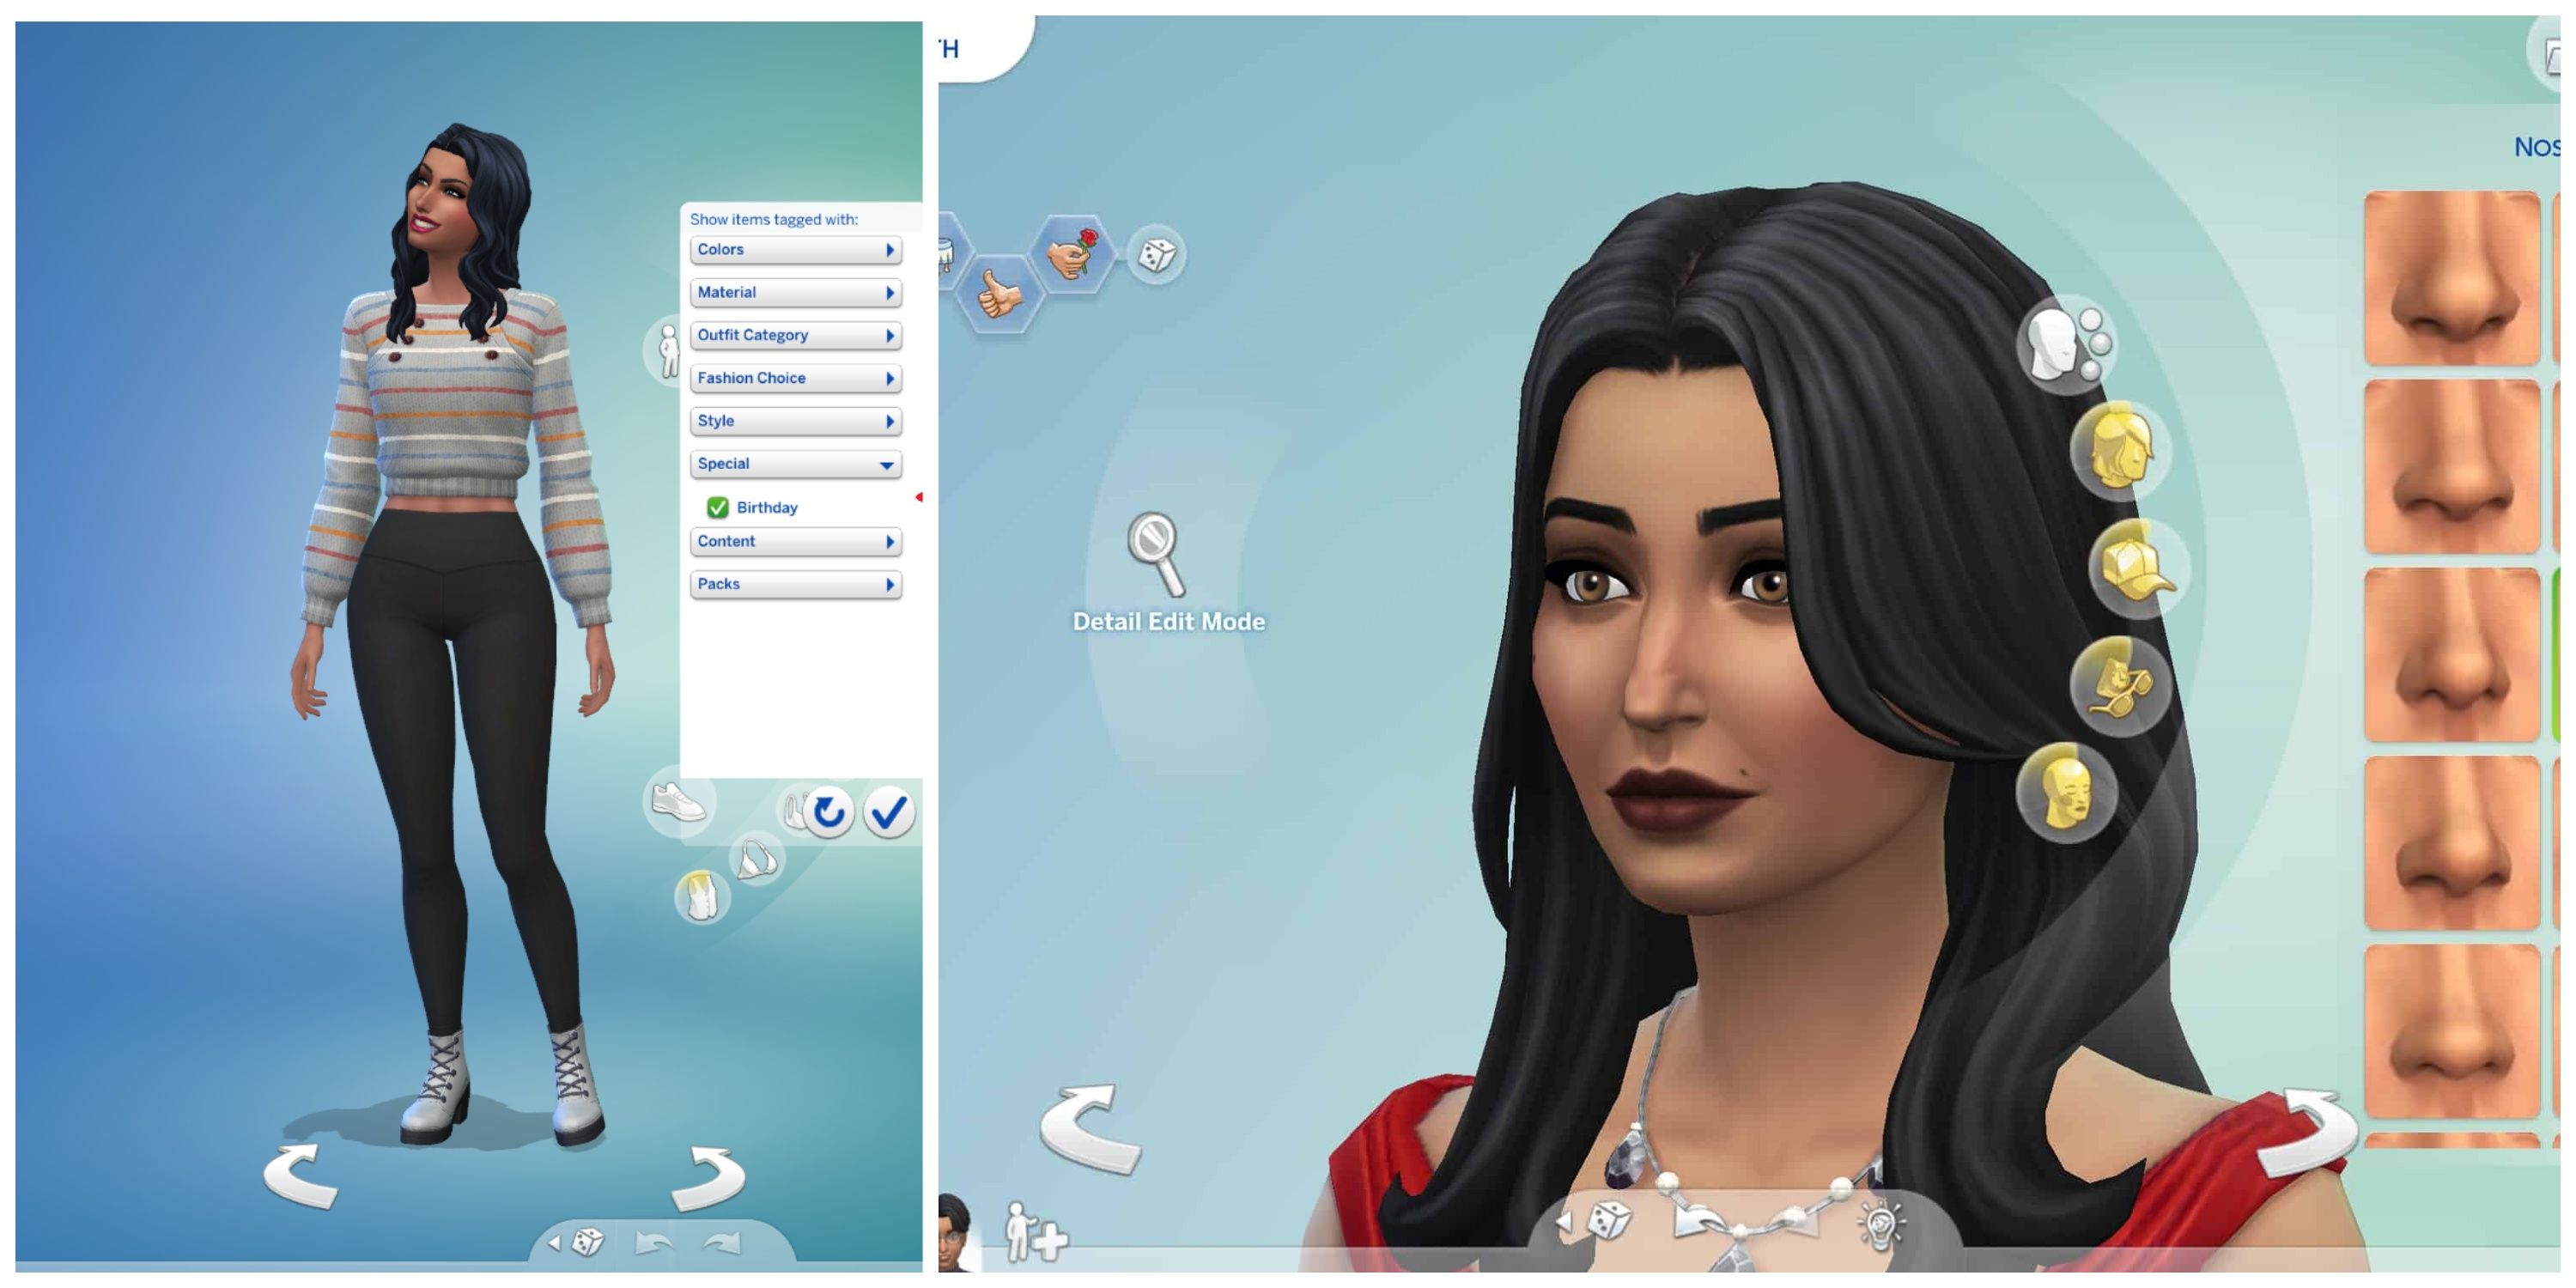 The Sims Introduces New Trans-Inclusive Options & We're Cheering